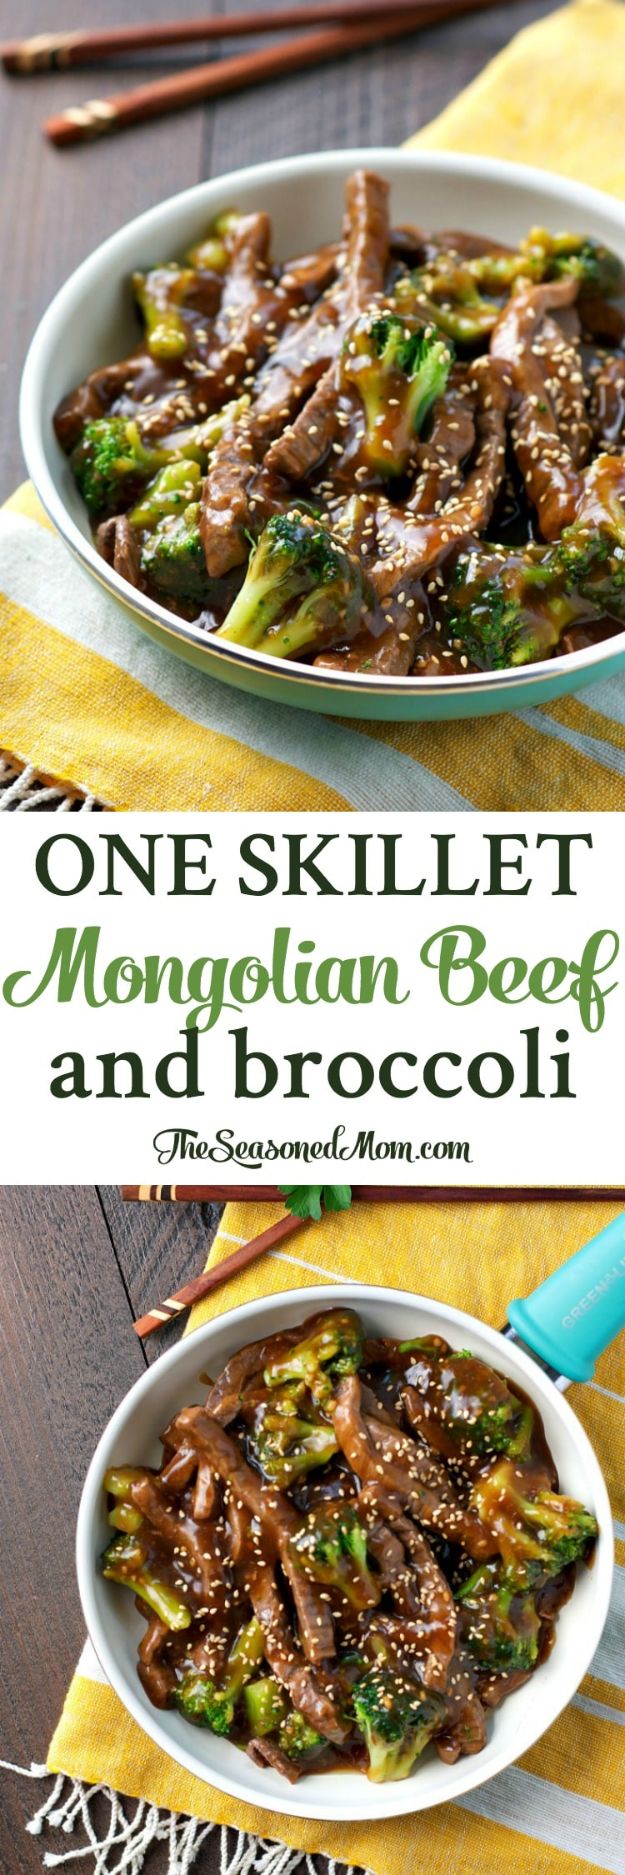  Easy Dinner Recipes - One Skillet Mongolian Beef Broccoli - Quick and Simple Dinner Recipe Ideas for Weeknight and Last Minute Supper - Chicken, Ground Beef, Fish, Pasta, Healthy Salads, Low Fat and Vegetarian Dishes #easyrecipes #dinnerideas #recipes